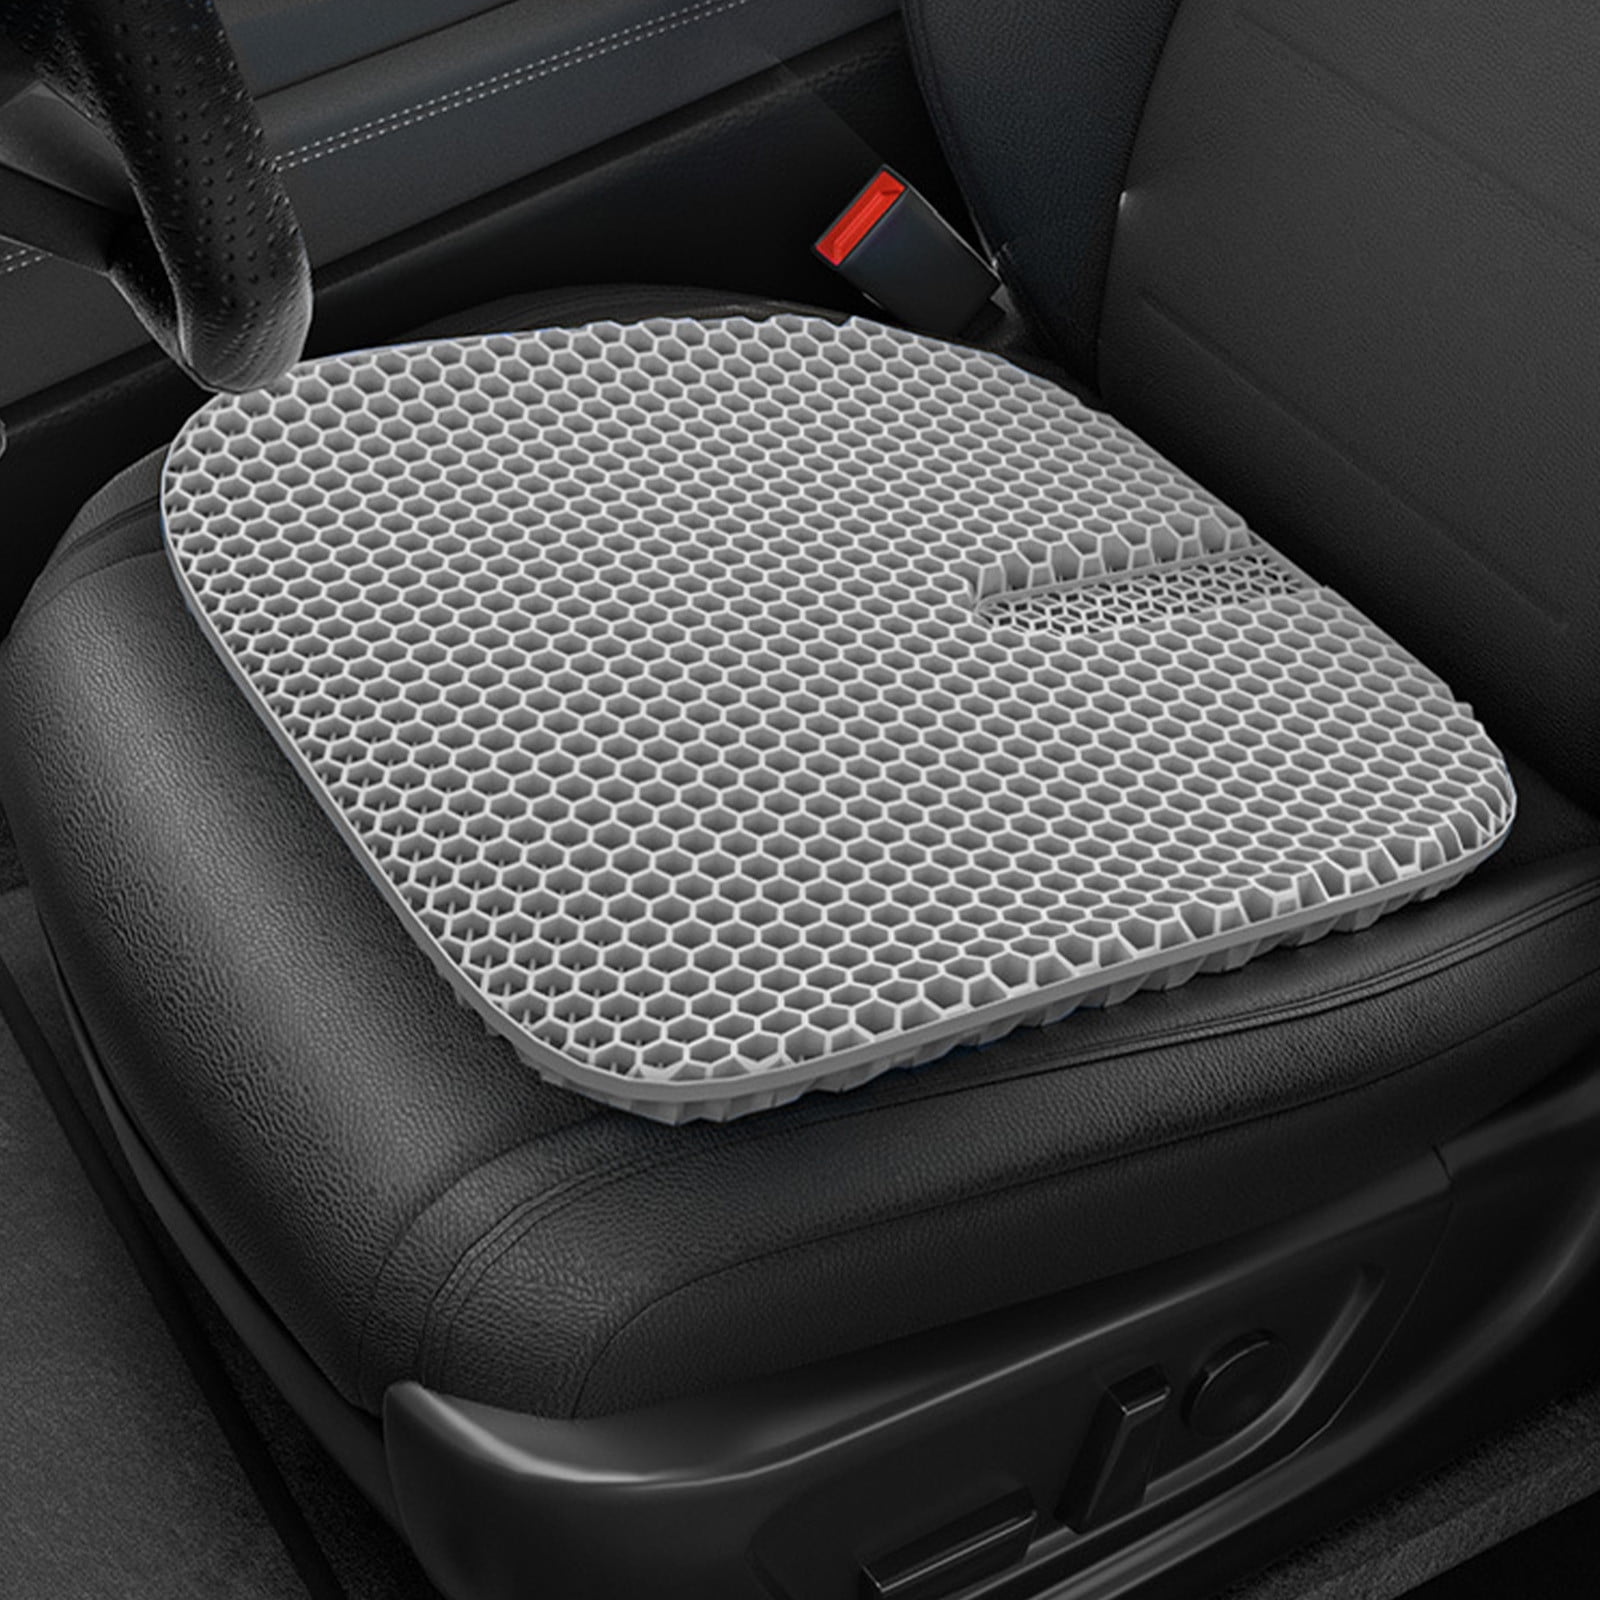 Gel Seat Cushion, Cooling seat Cushion Thick Big Breathable Honeycomb  Design Absorbs Pressure Points Seat Cushion with Non-Slip Cover Gel Cushion  for Office Chair Home Car seat Cushion for Back Pain 